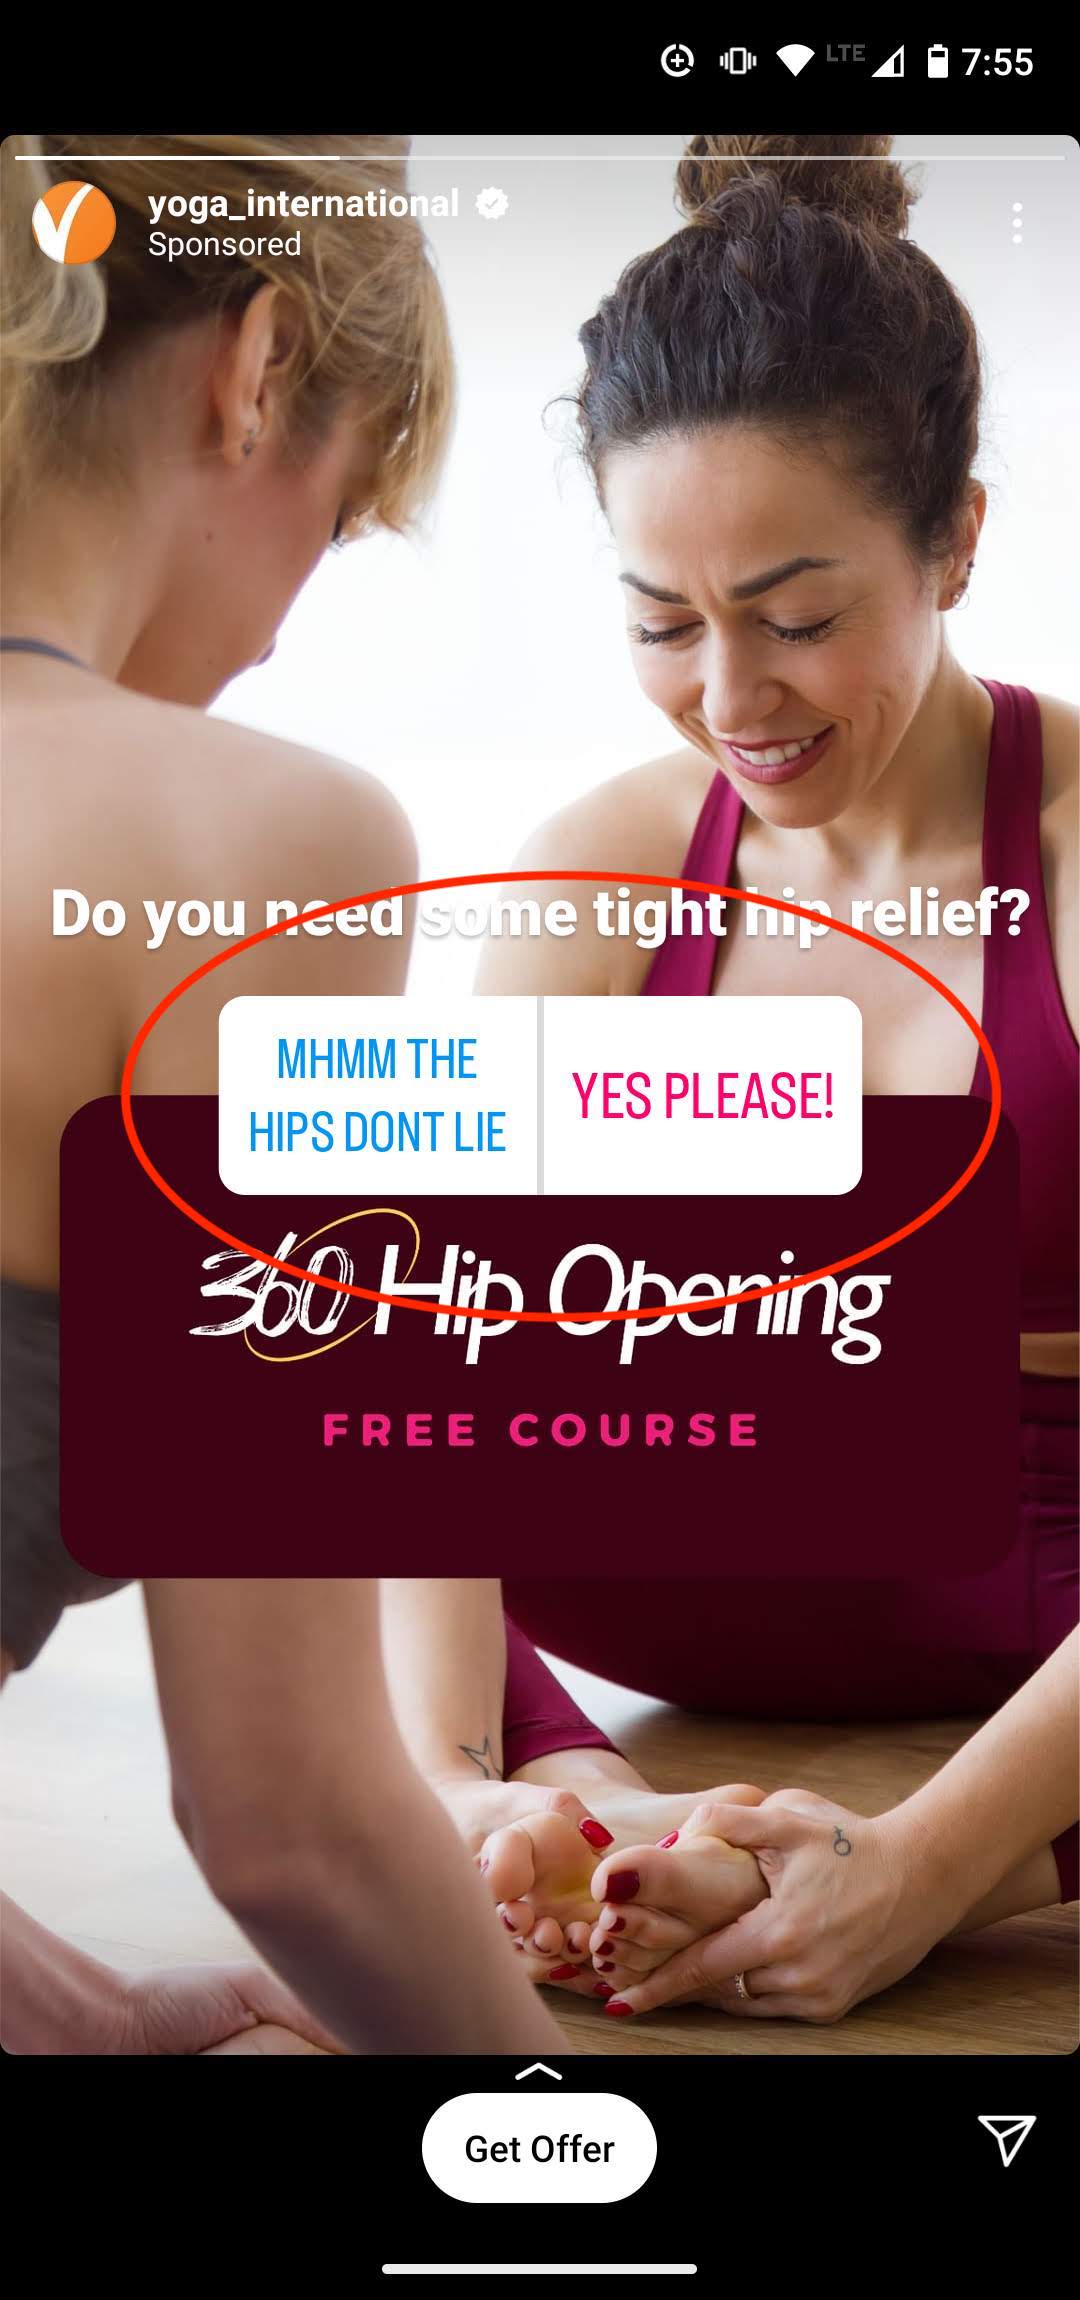 Yoga International hip opening question button